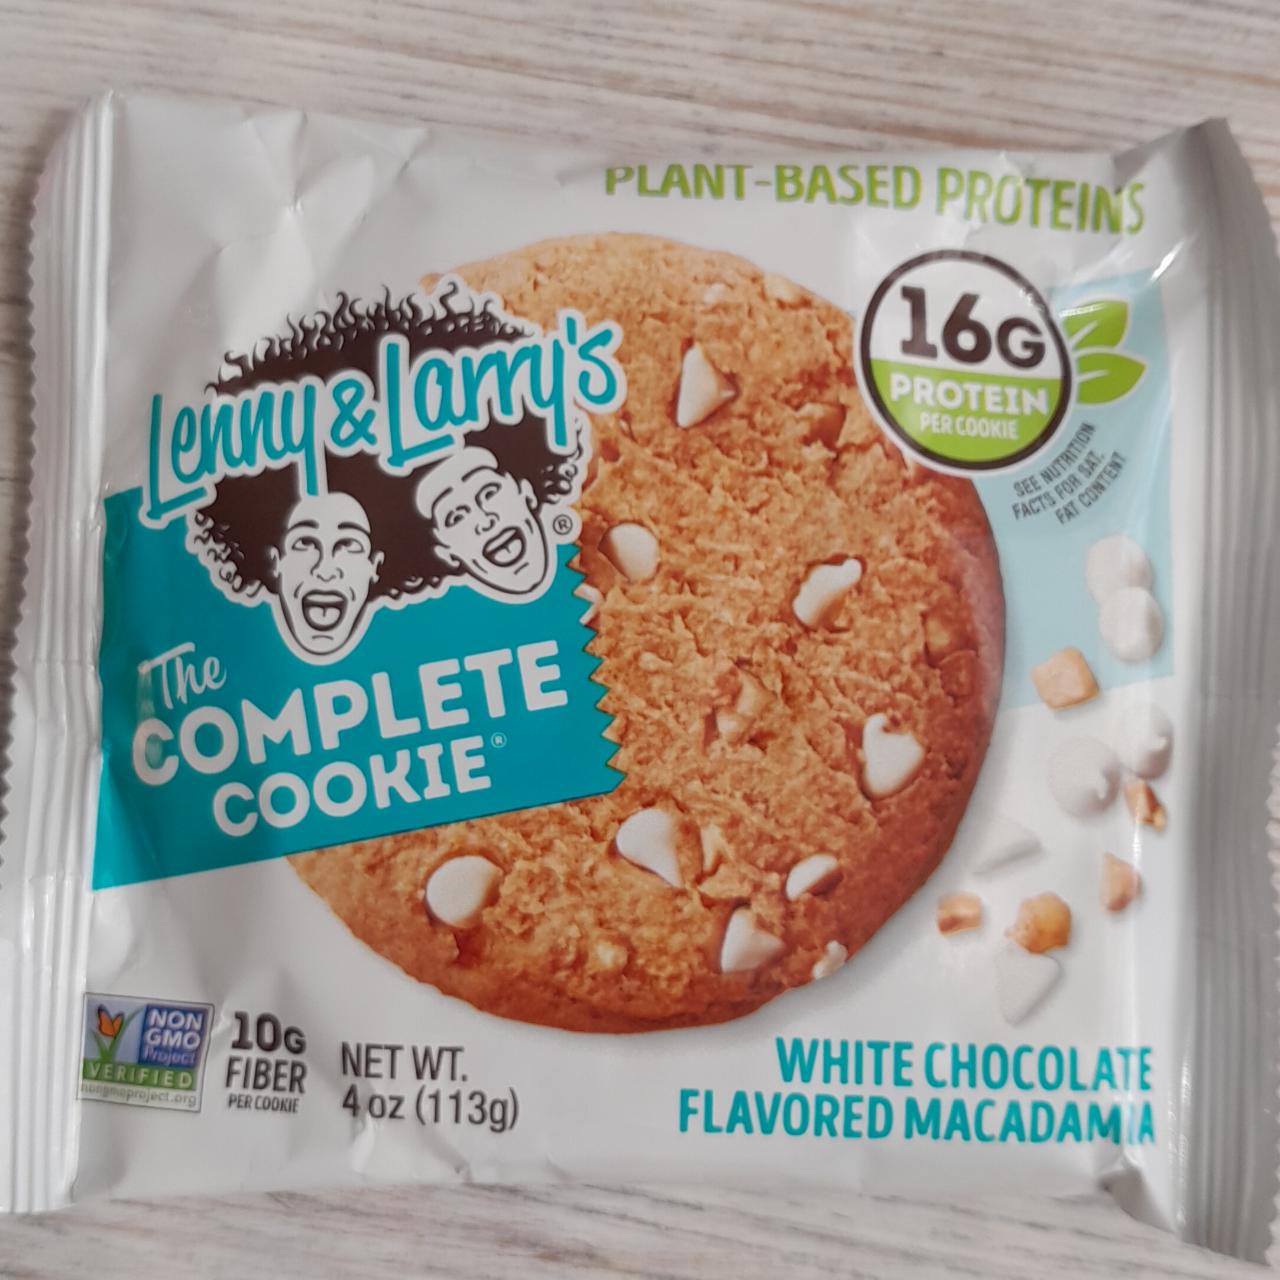 Fotografie - The Complete Cookie 16g protein White Chocolate Macadamia Lenny&Larry's